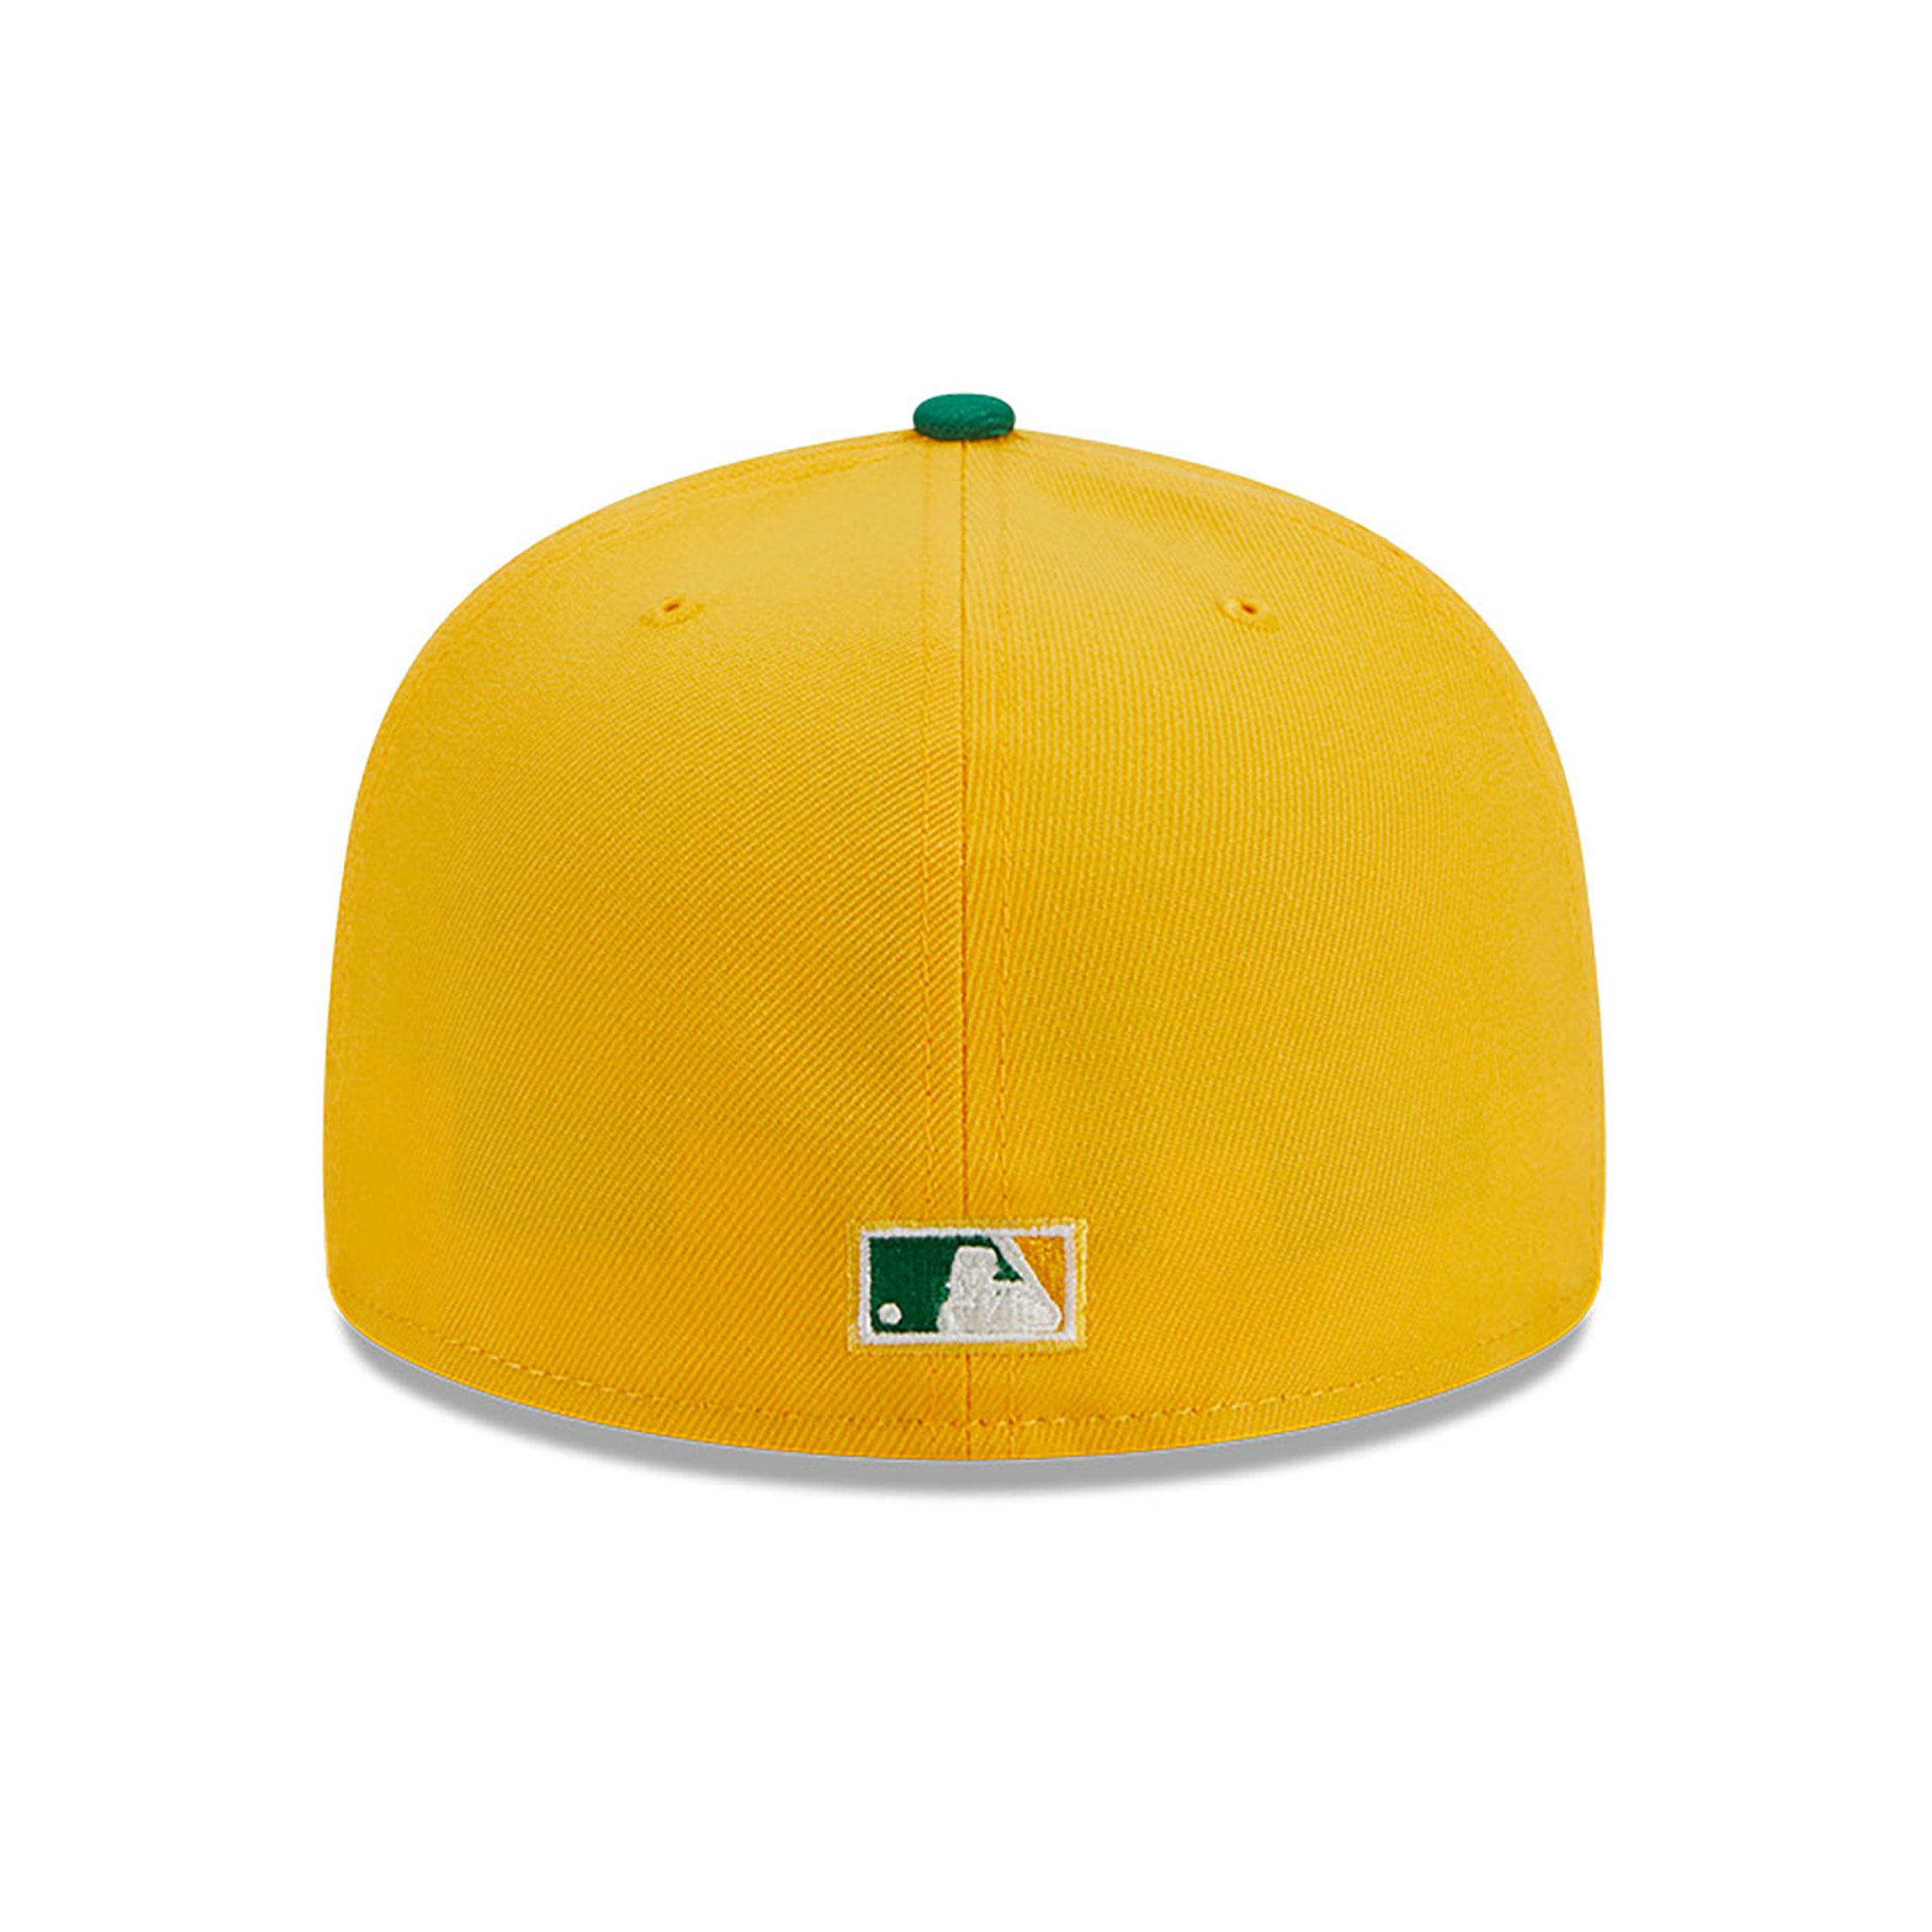 Oakland Athletics City Flag Yellow 59FIFTY Fitted Cap